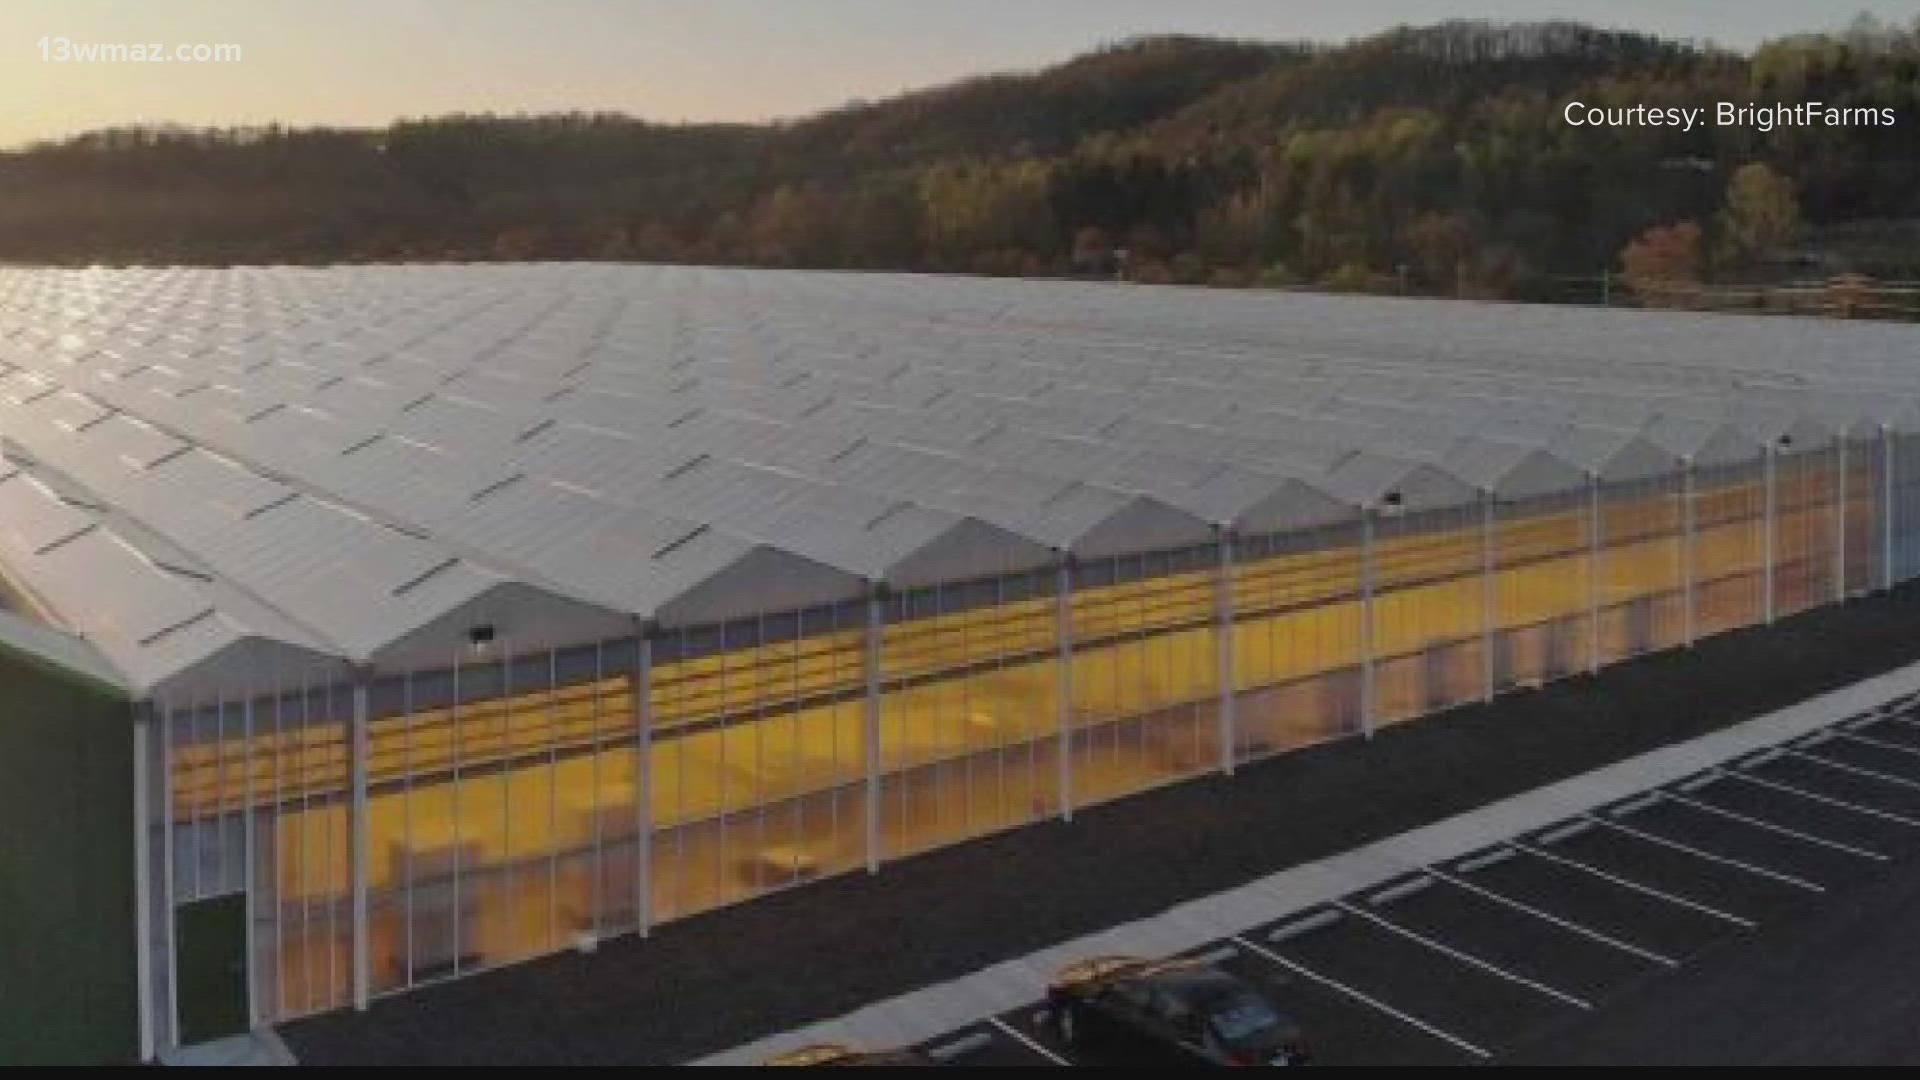 Four giant greenhouses could soon be developed in south Bibb County, bringing along about 300 jobs